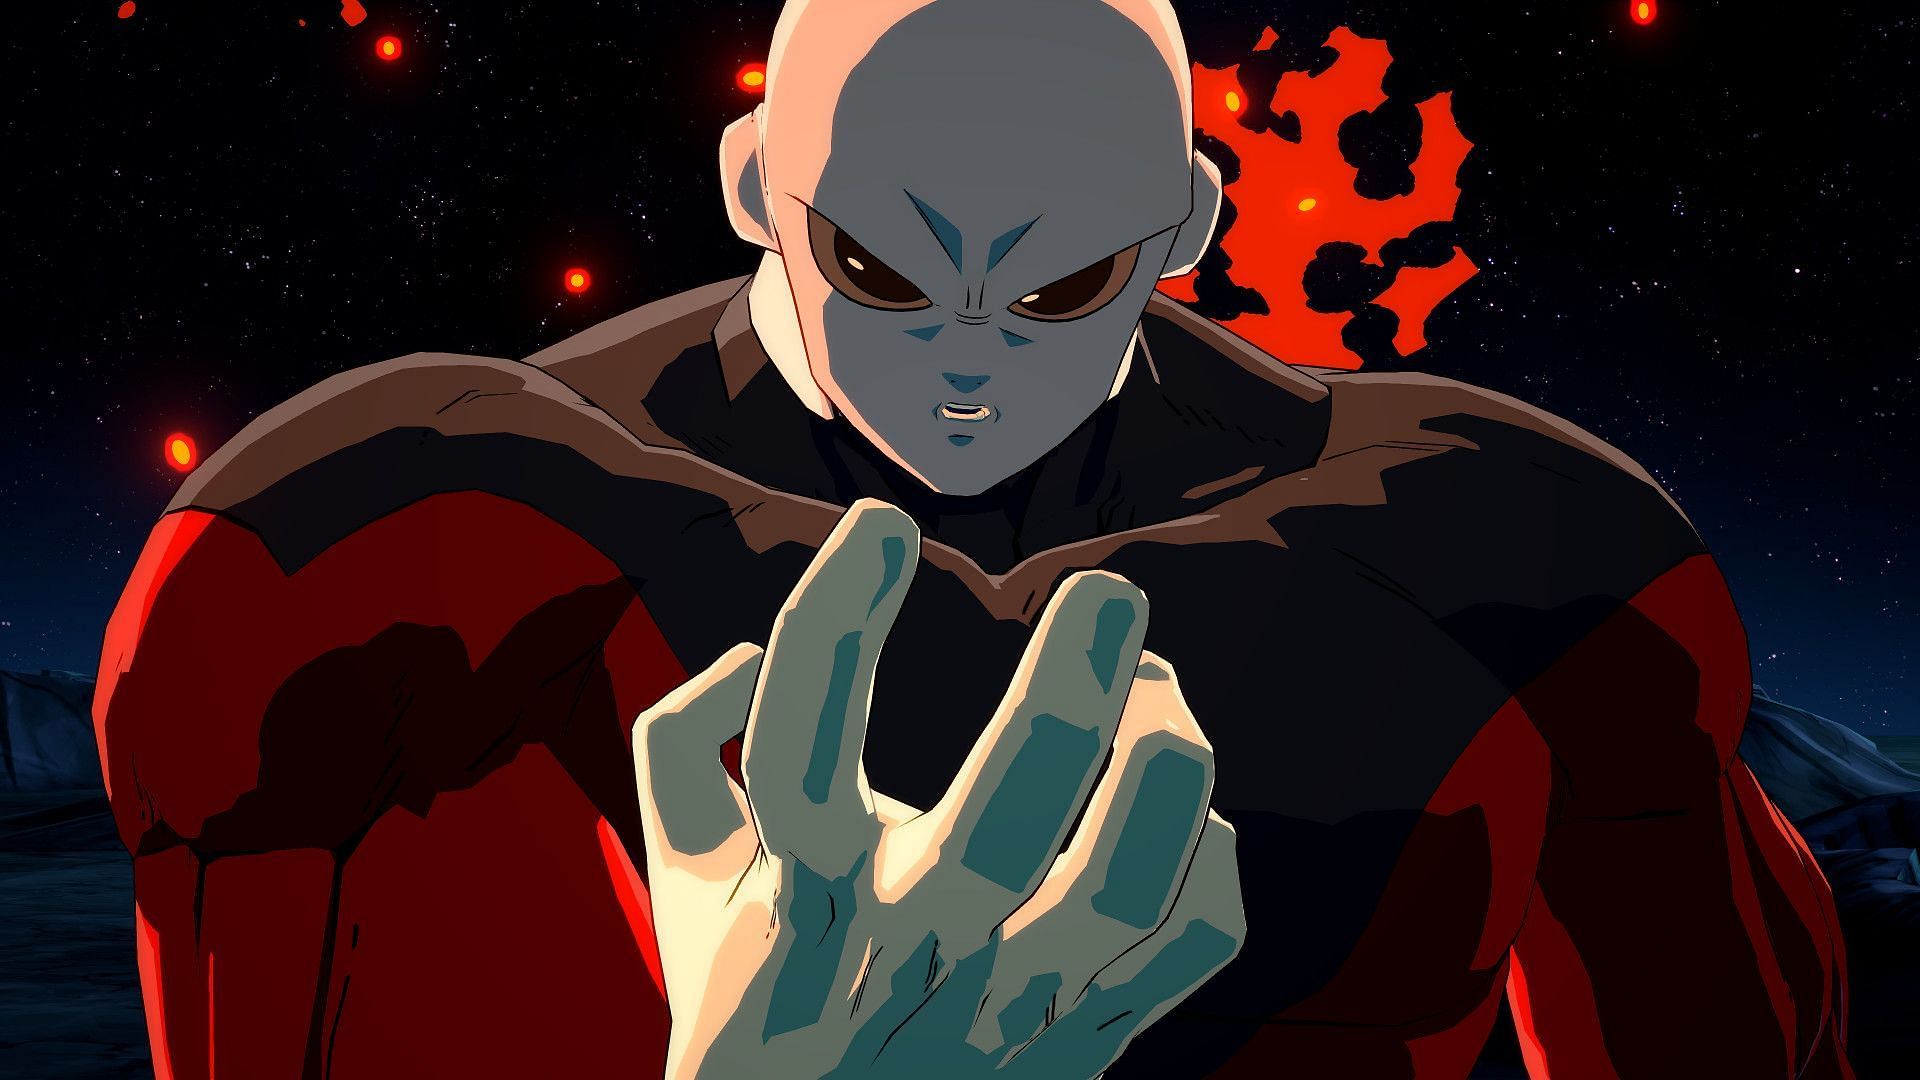 Jiren is one of the most disliked Dragon Ball characters (Image by Bandai Namco)